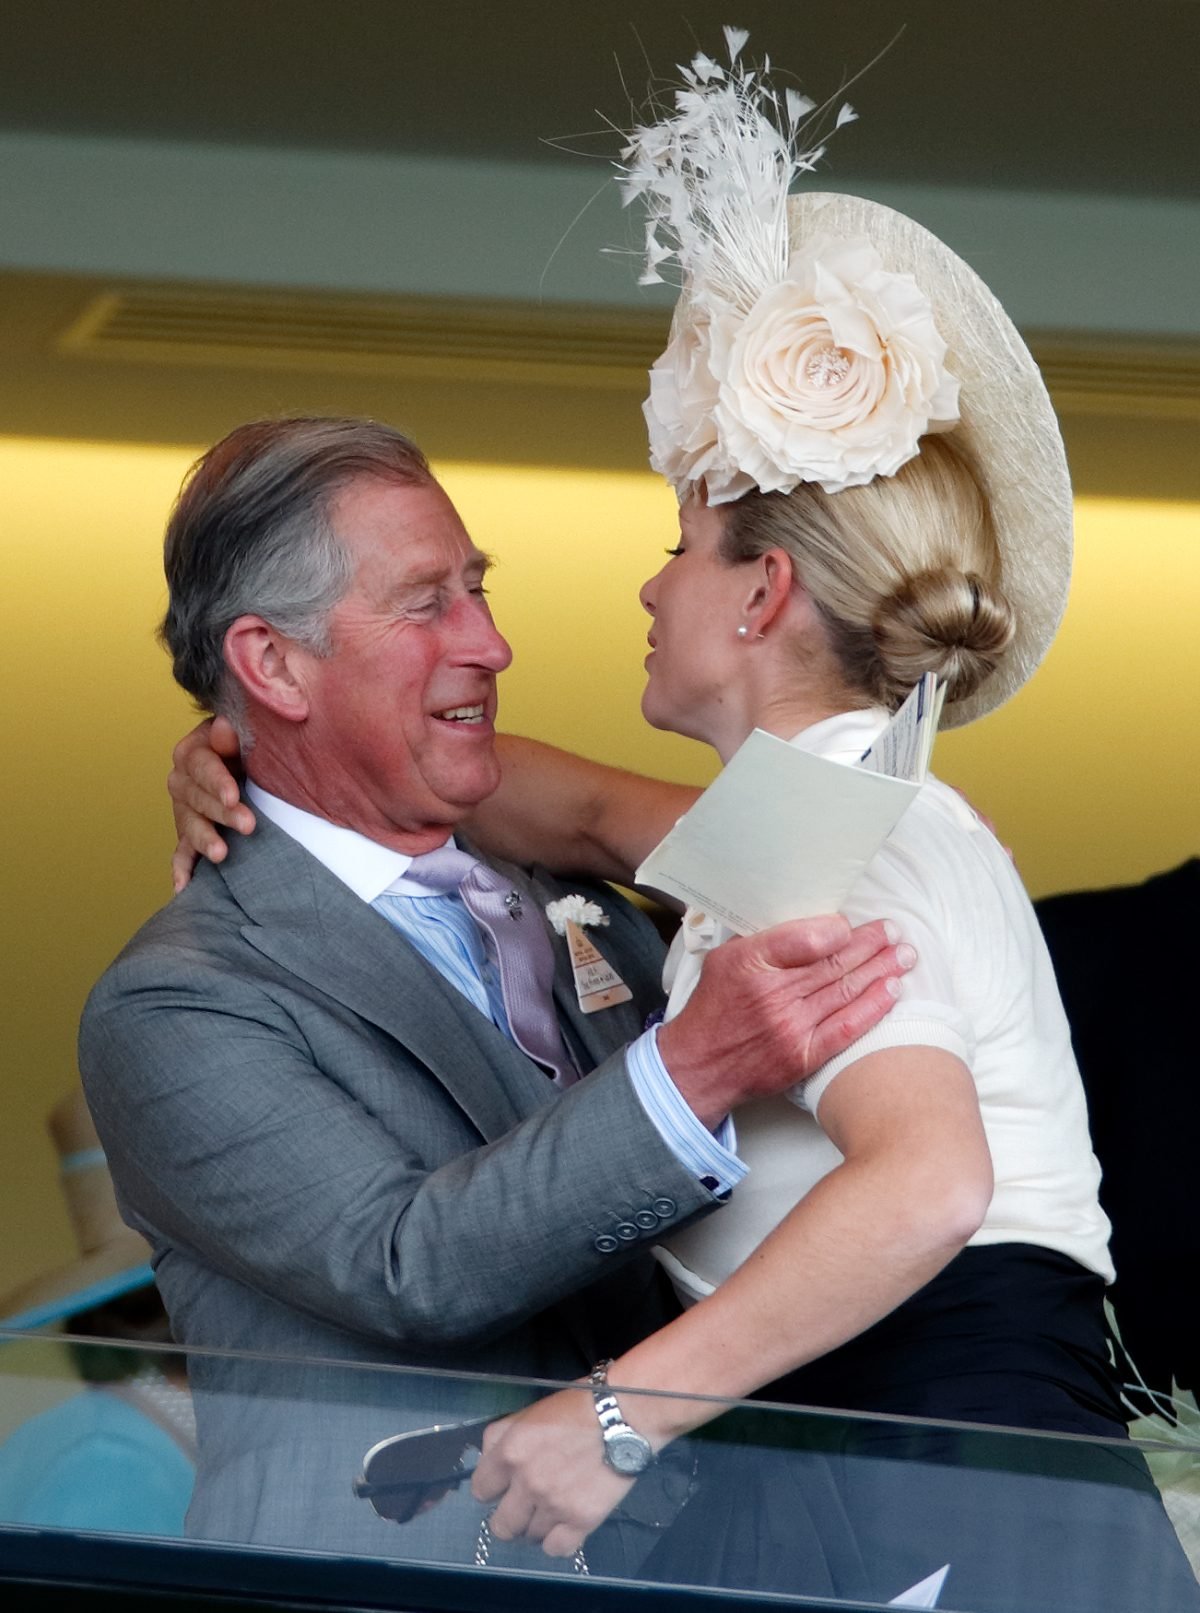 King Chalres and Zara Tindall greet each other with a hug as they attend day 1 of Royal Ascot